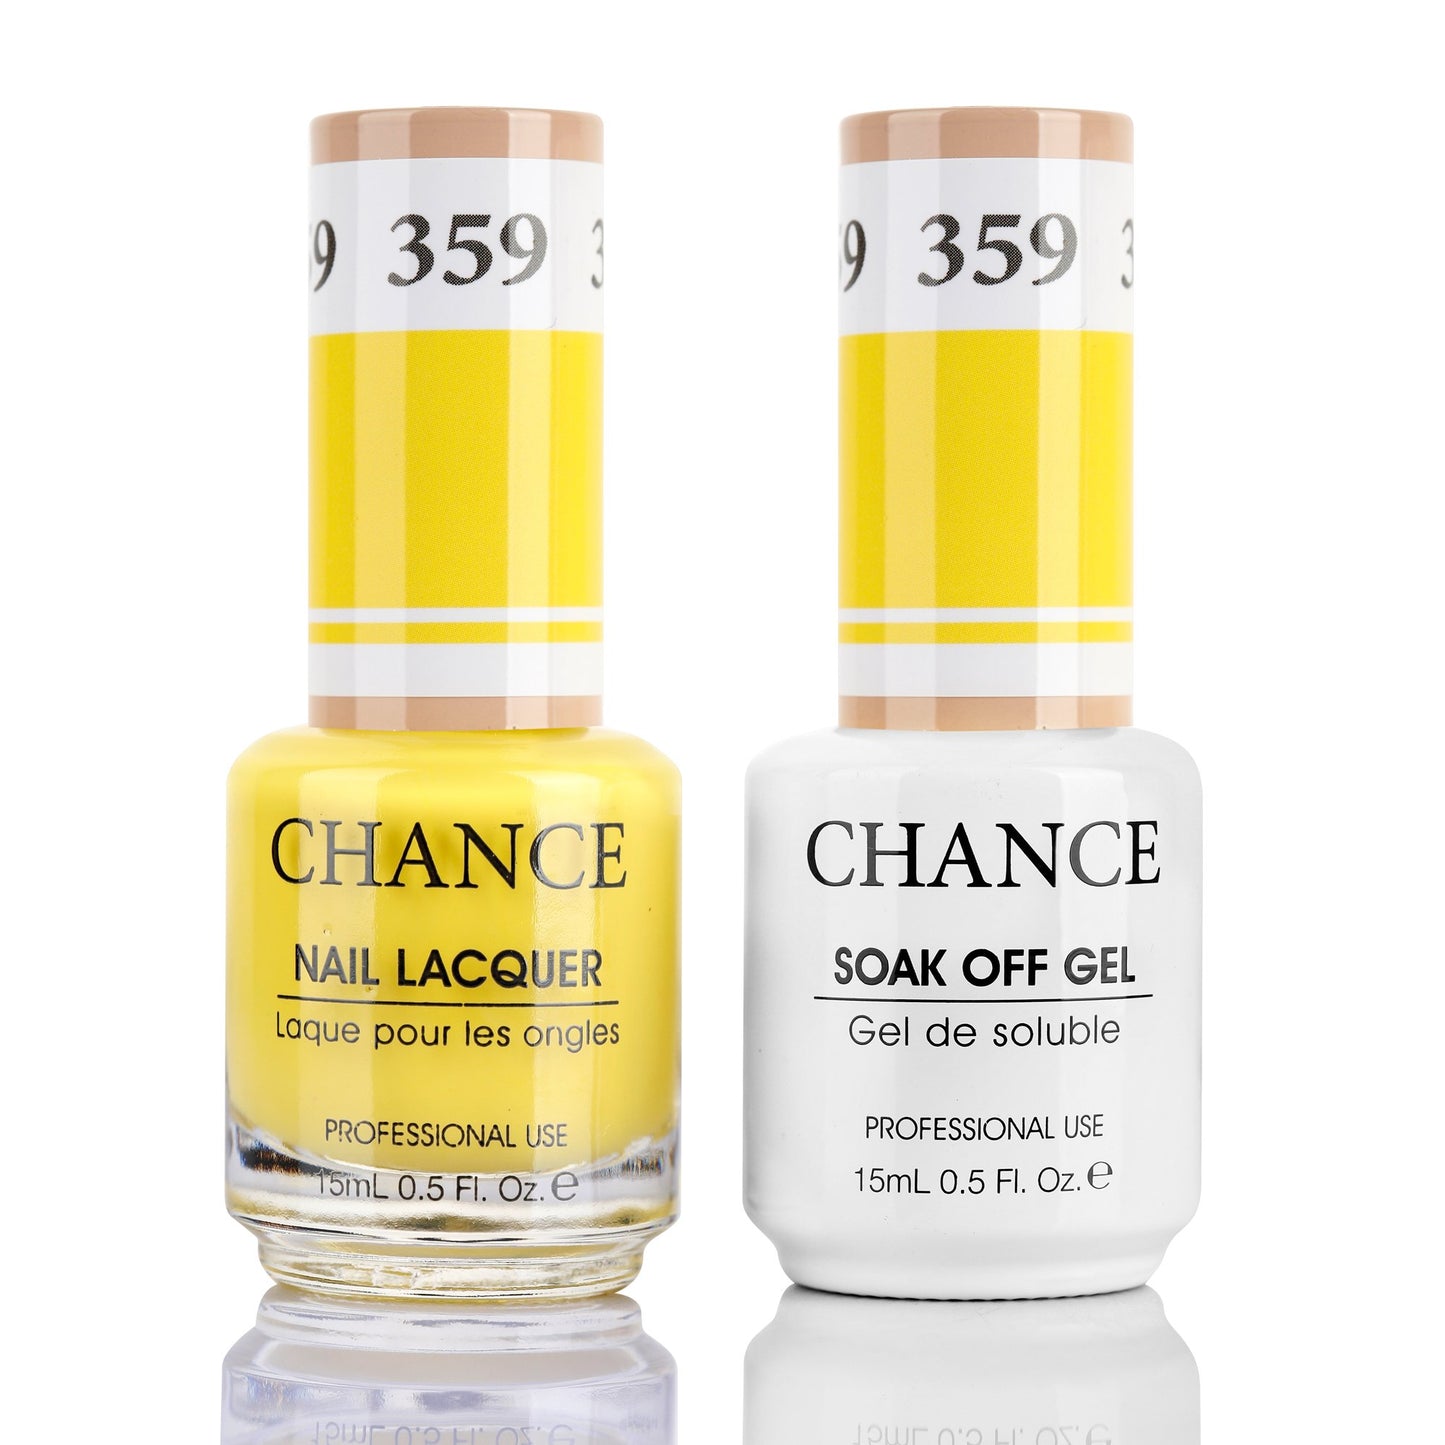 Chance Gel/Lacquer Duo 359